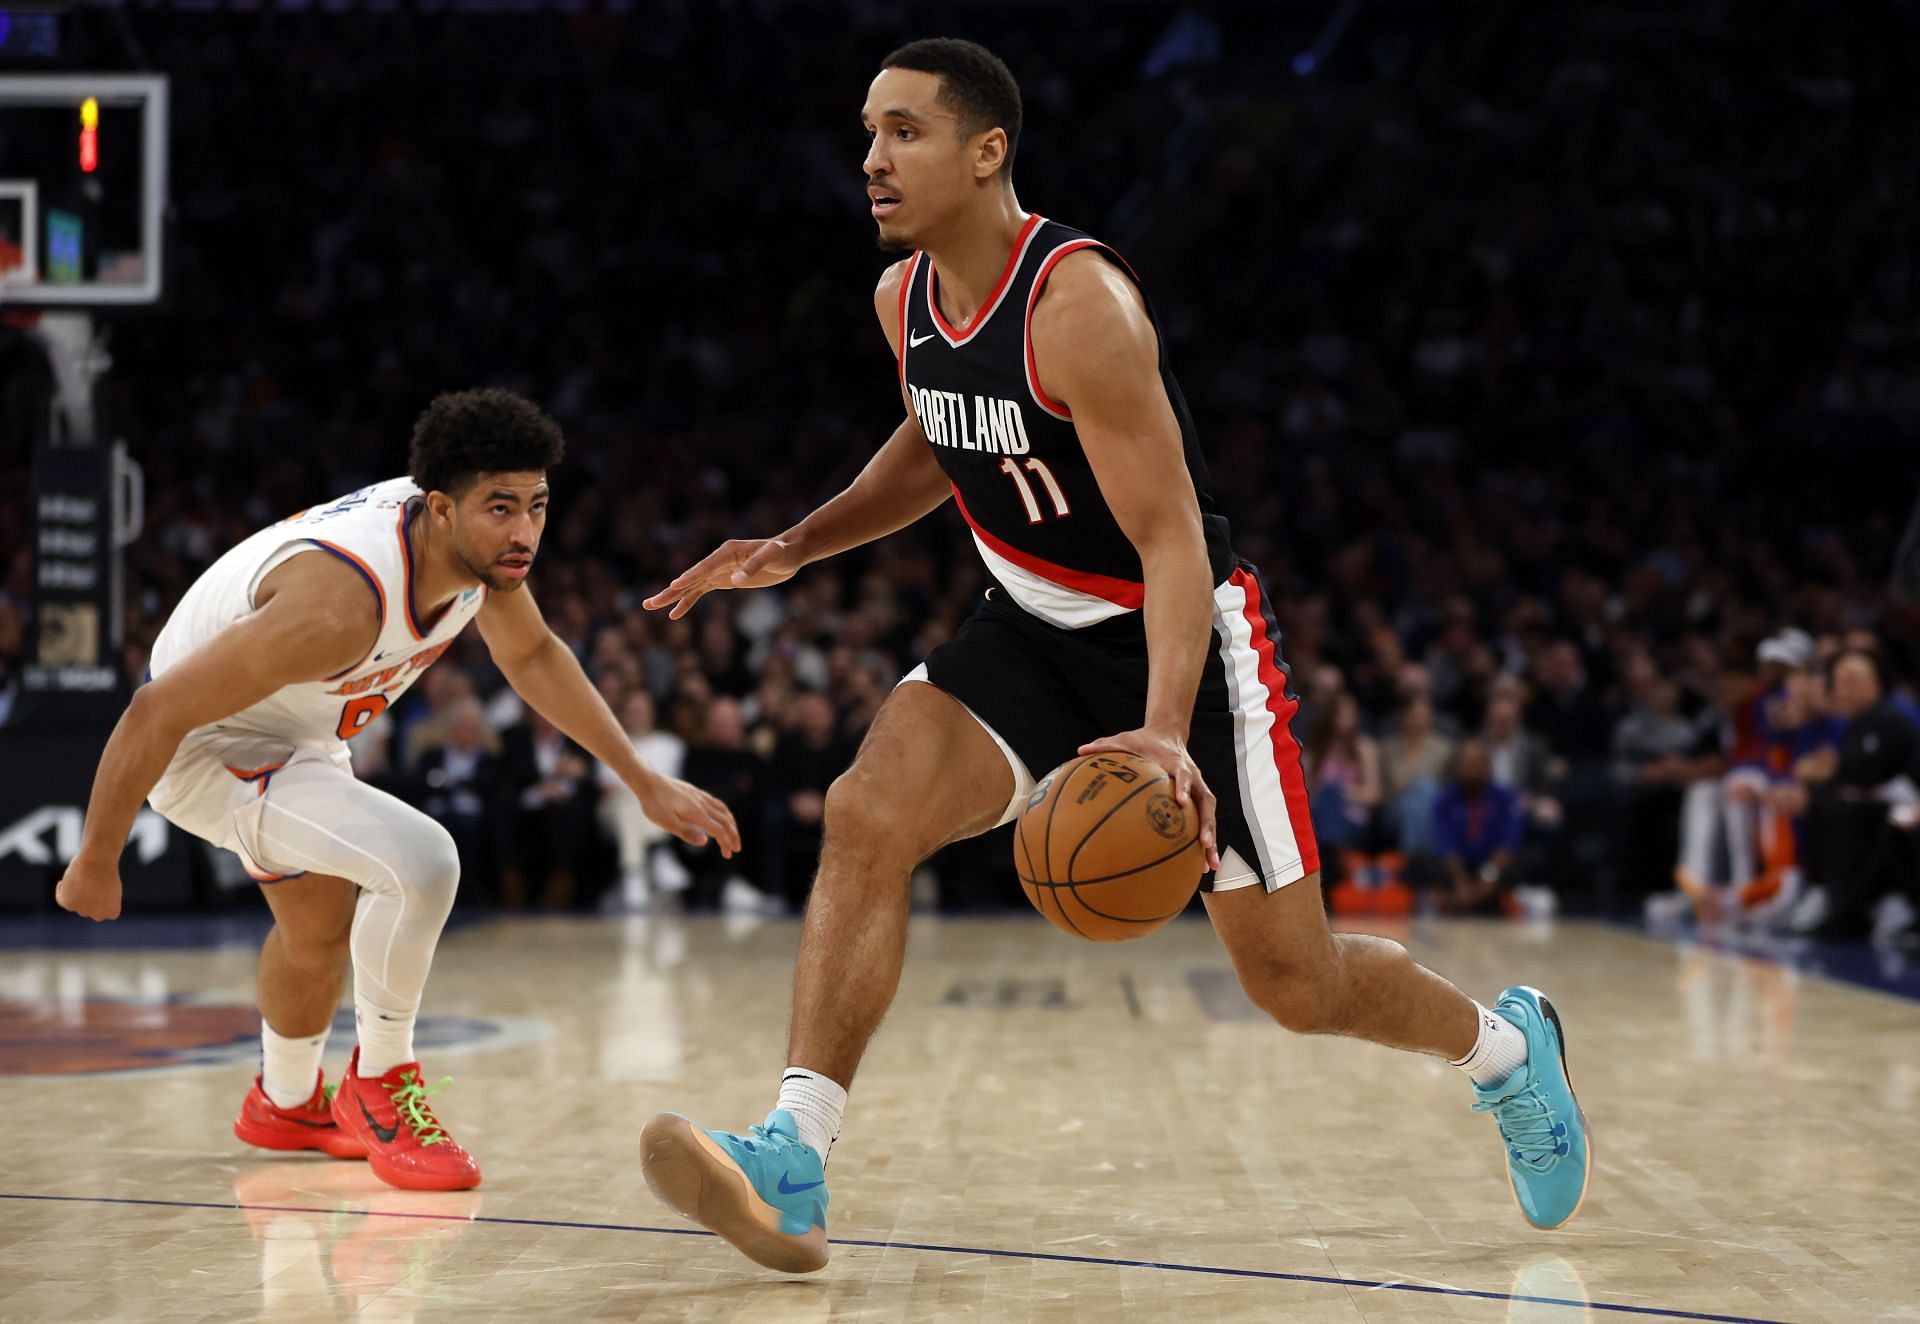 Malcolm Brogdon is available before the NBA Trade Deadline